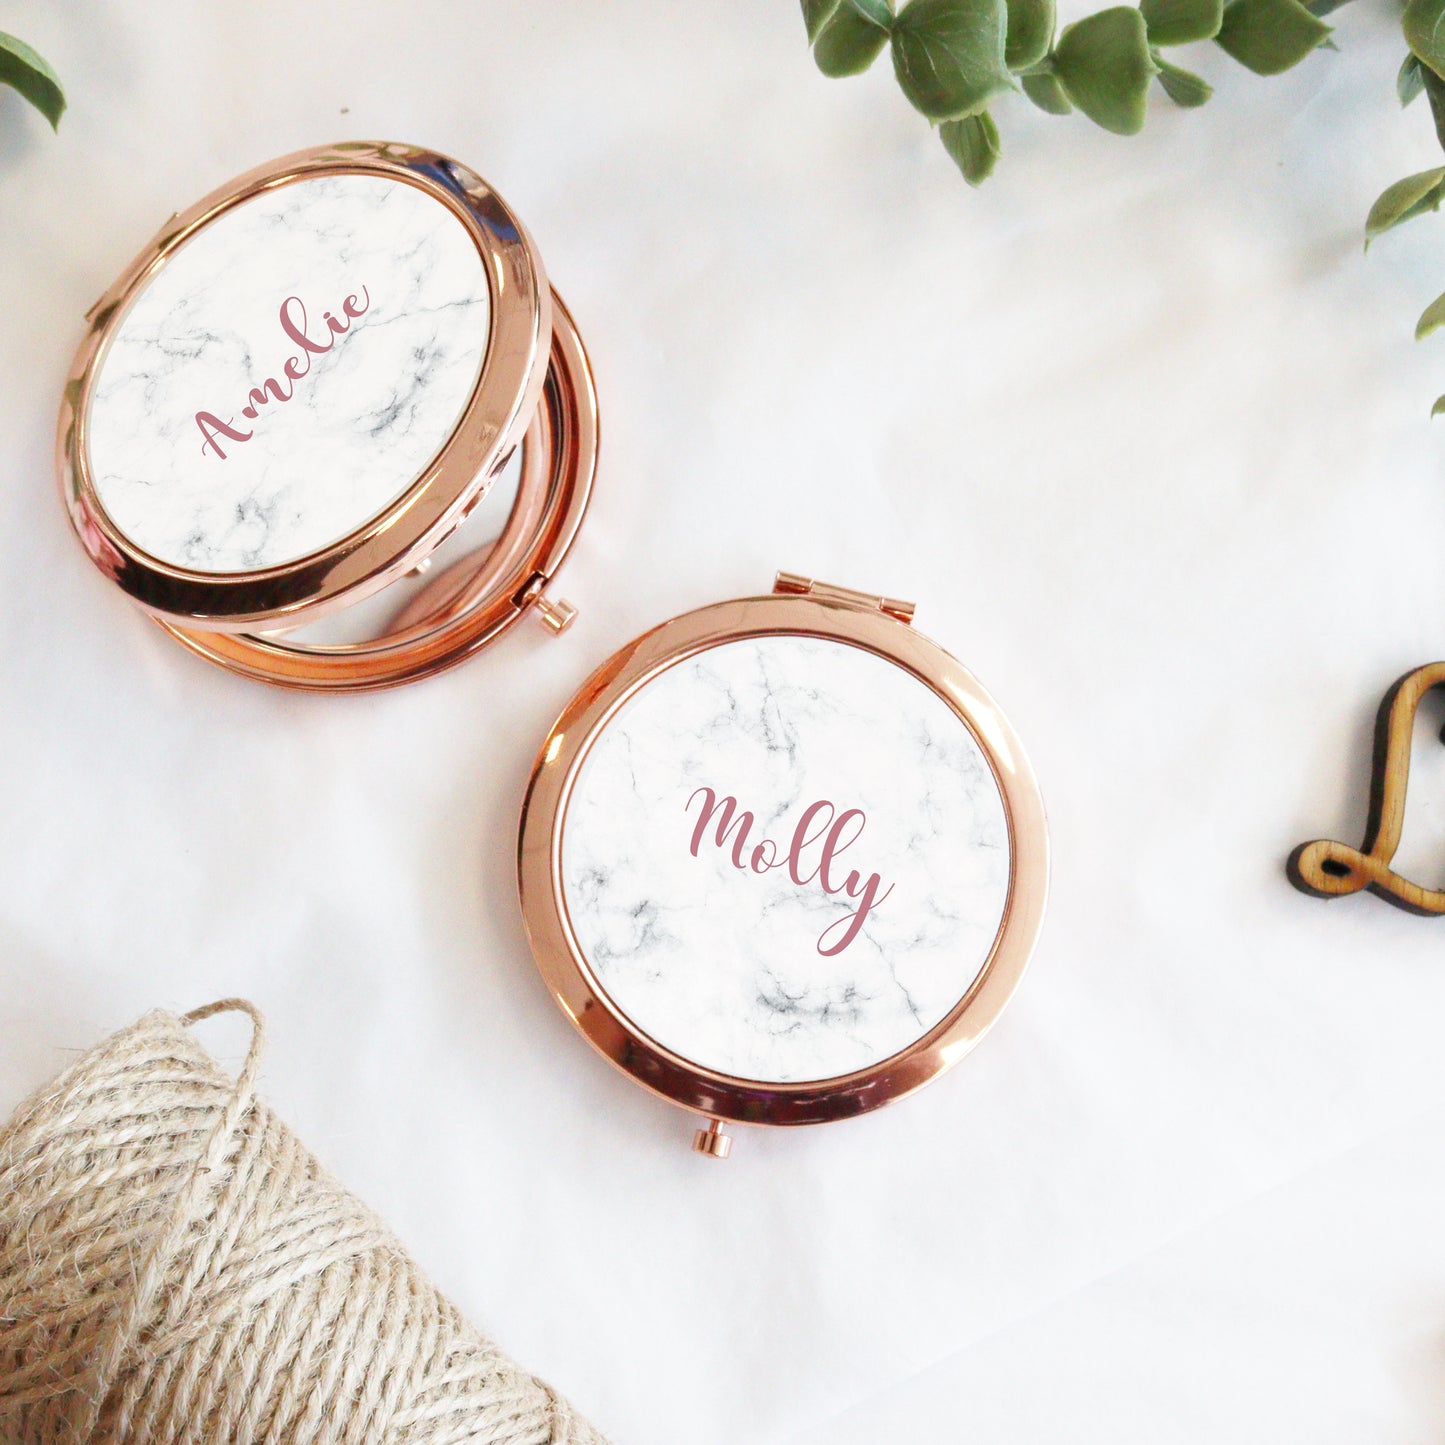 Personalised Rose Gold Compact Mirror